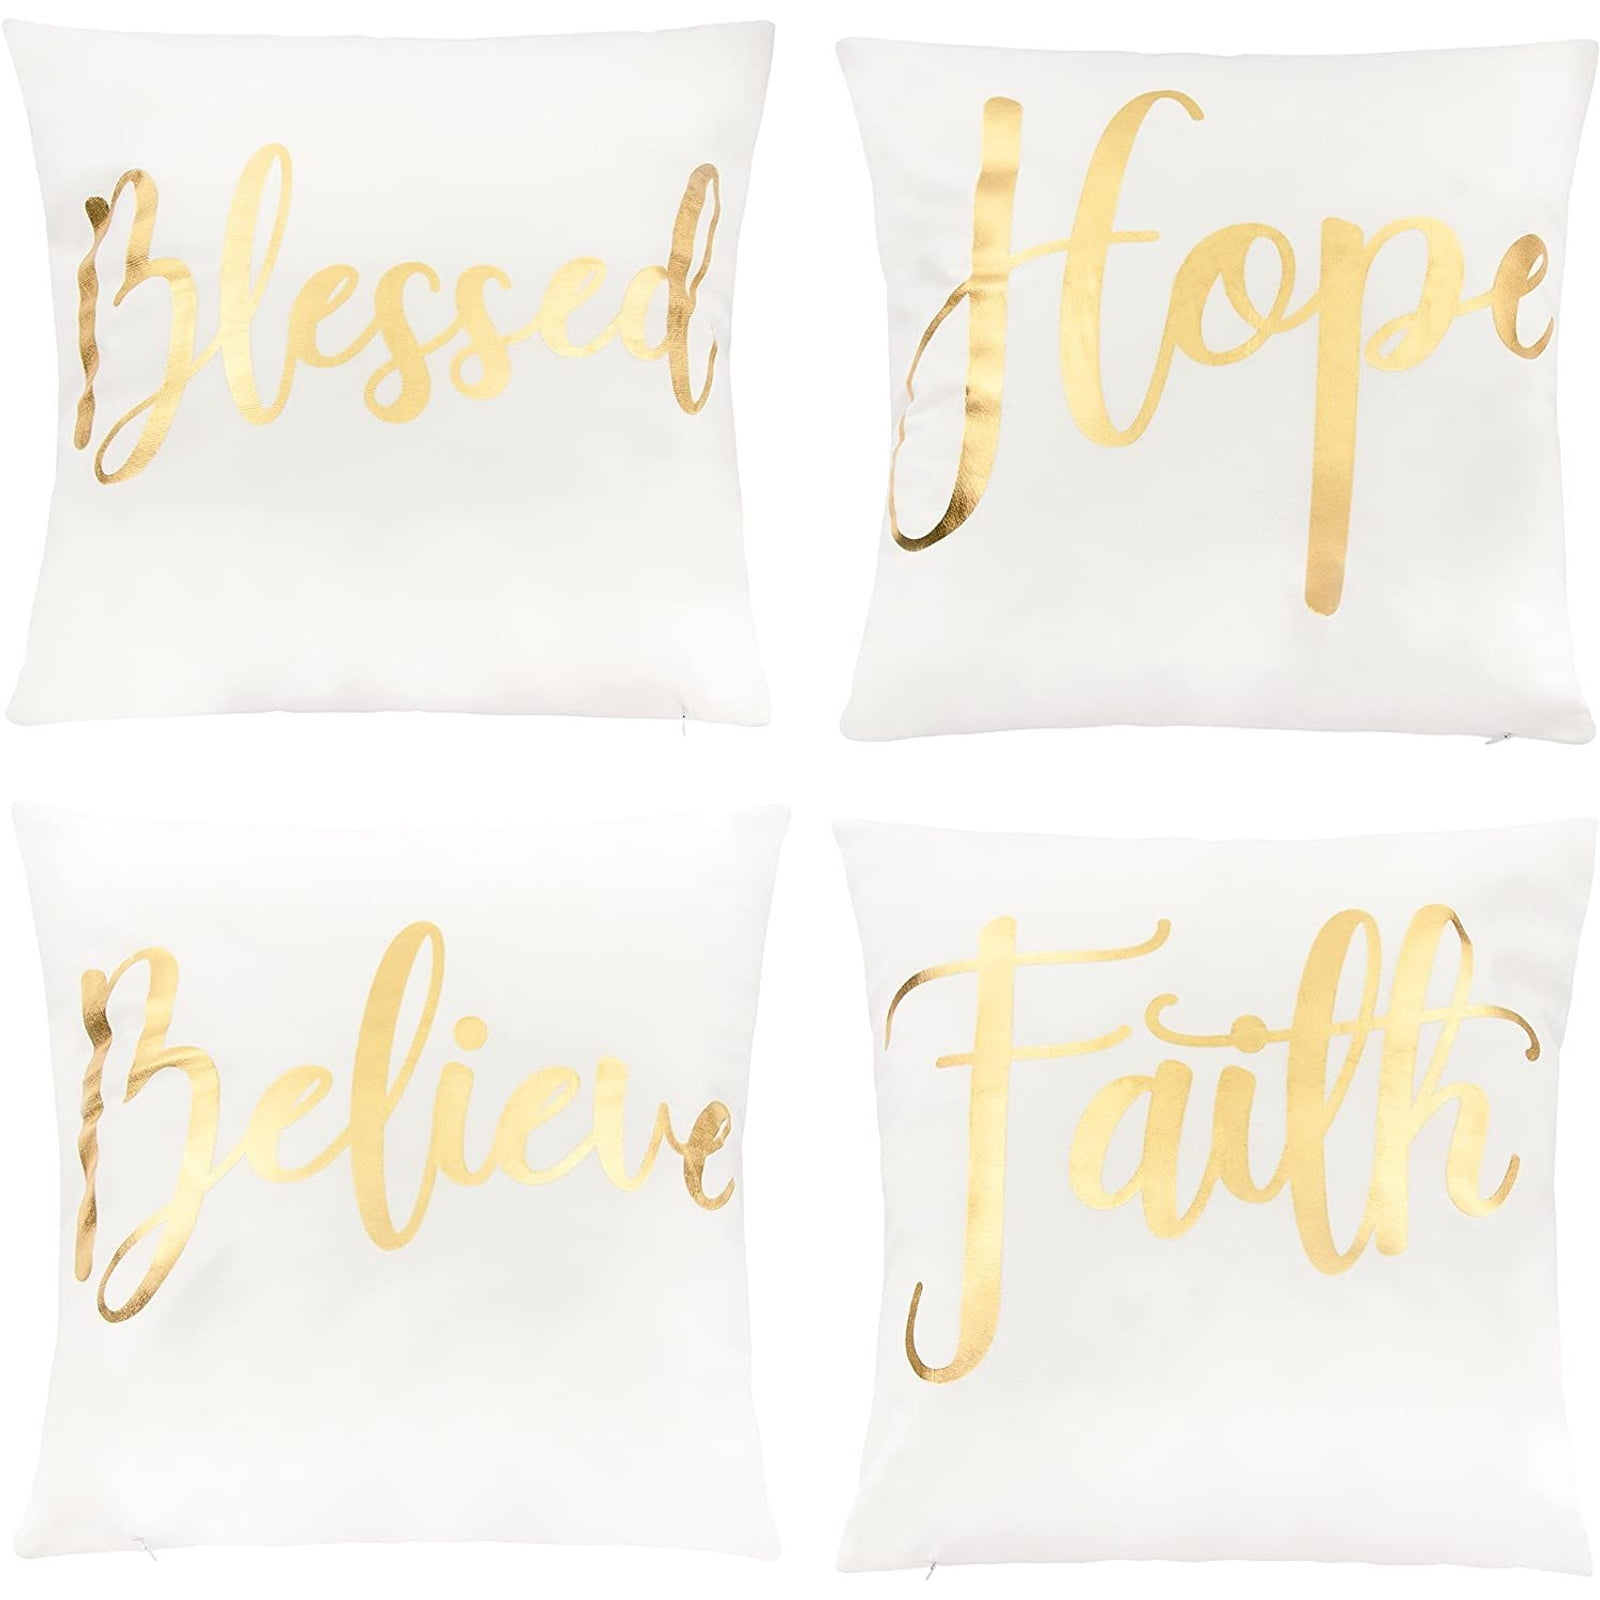 Ussuperstar Set of 4 Throw Pillow Covers Decorative Boho Cushion Cover Throw Flo 